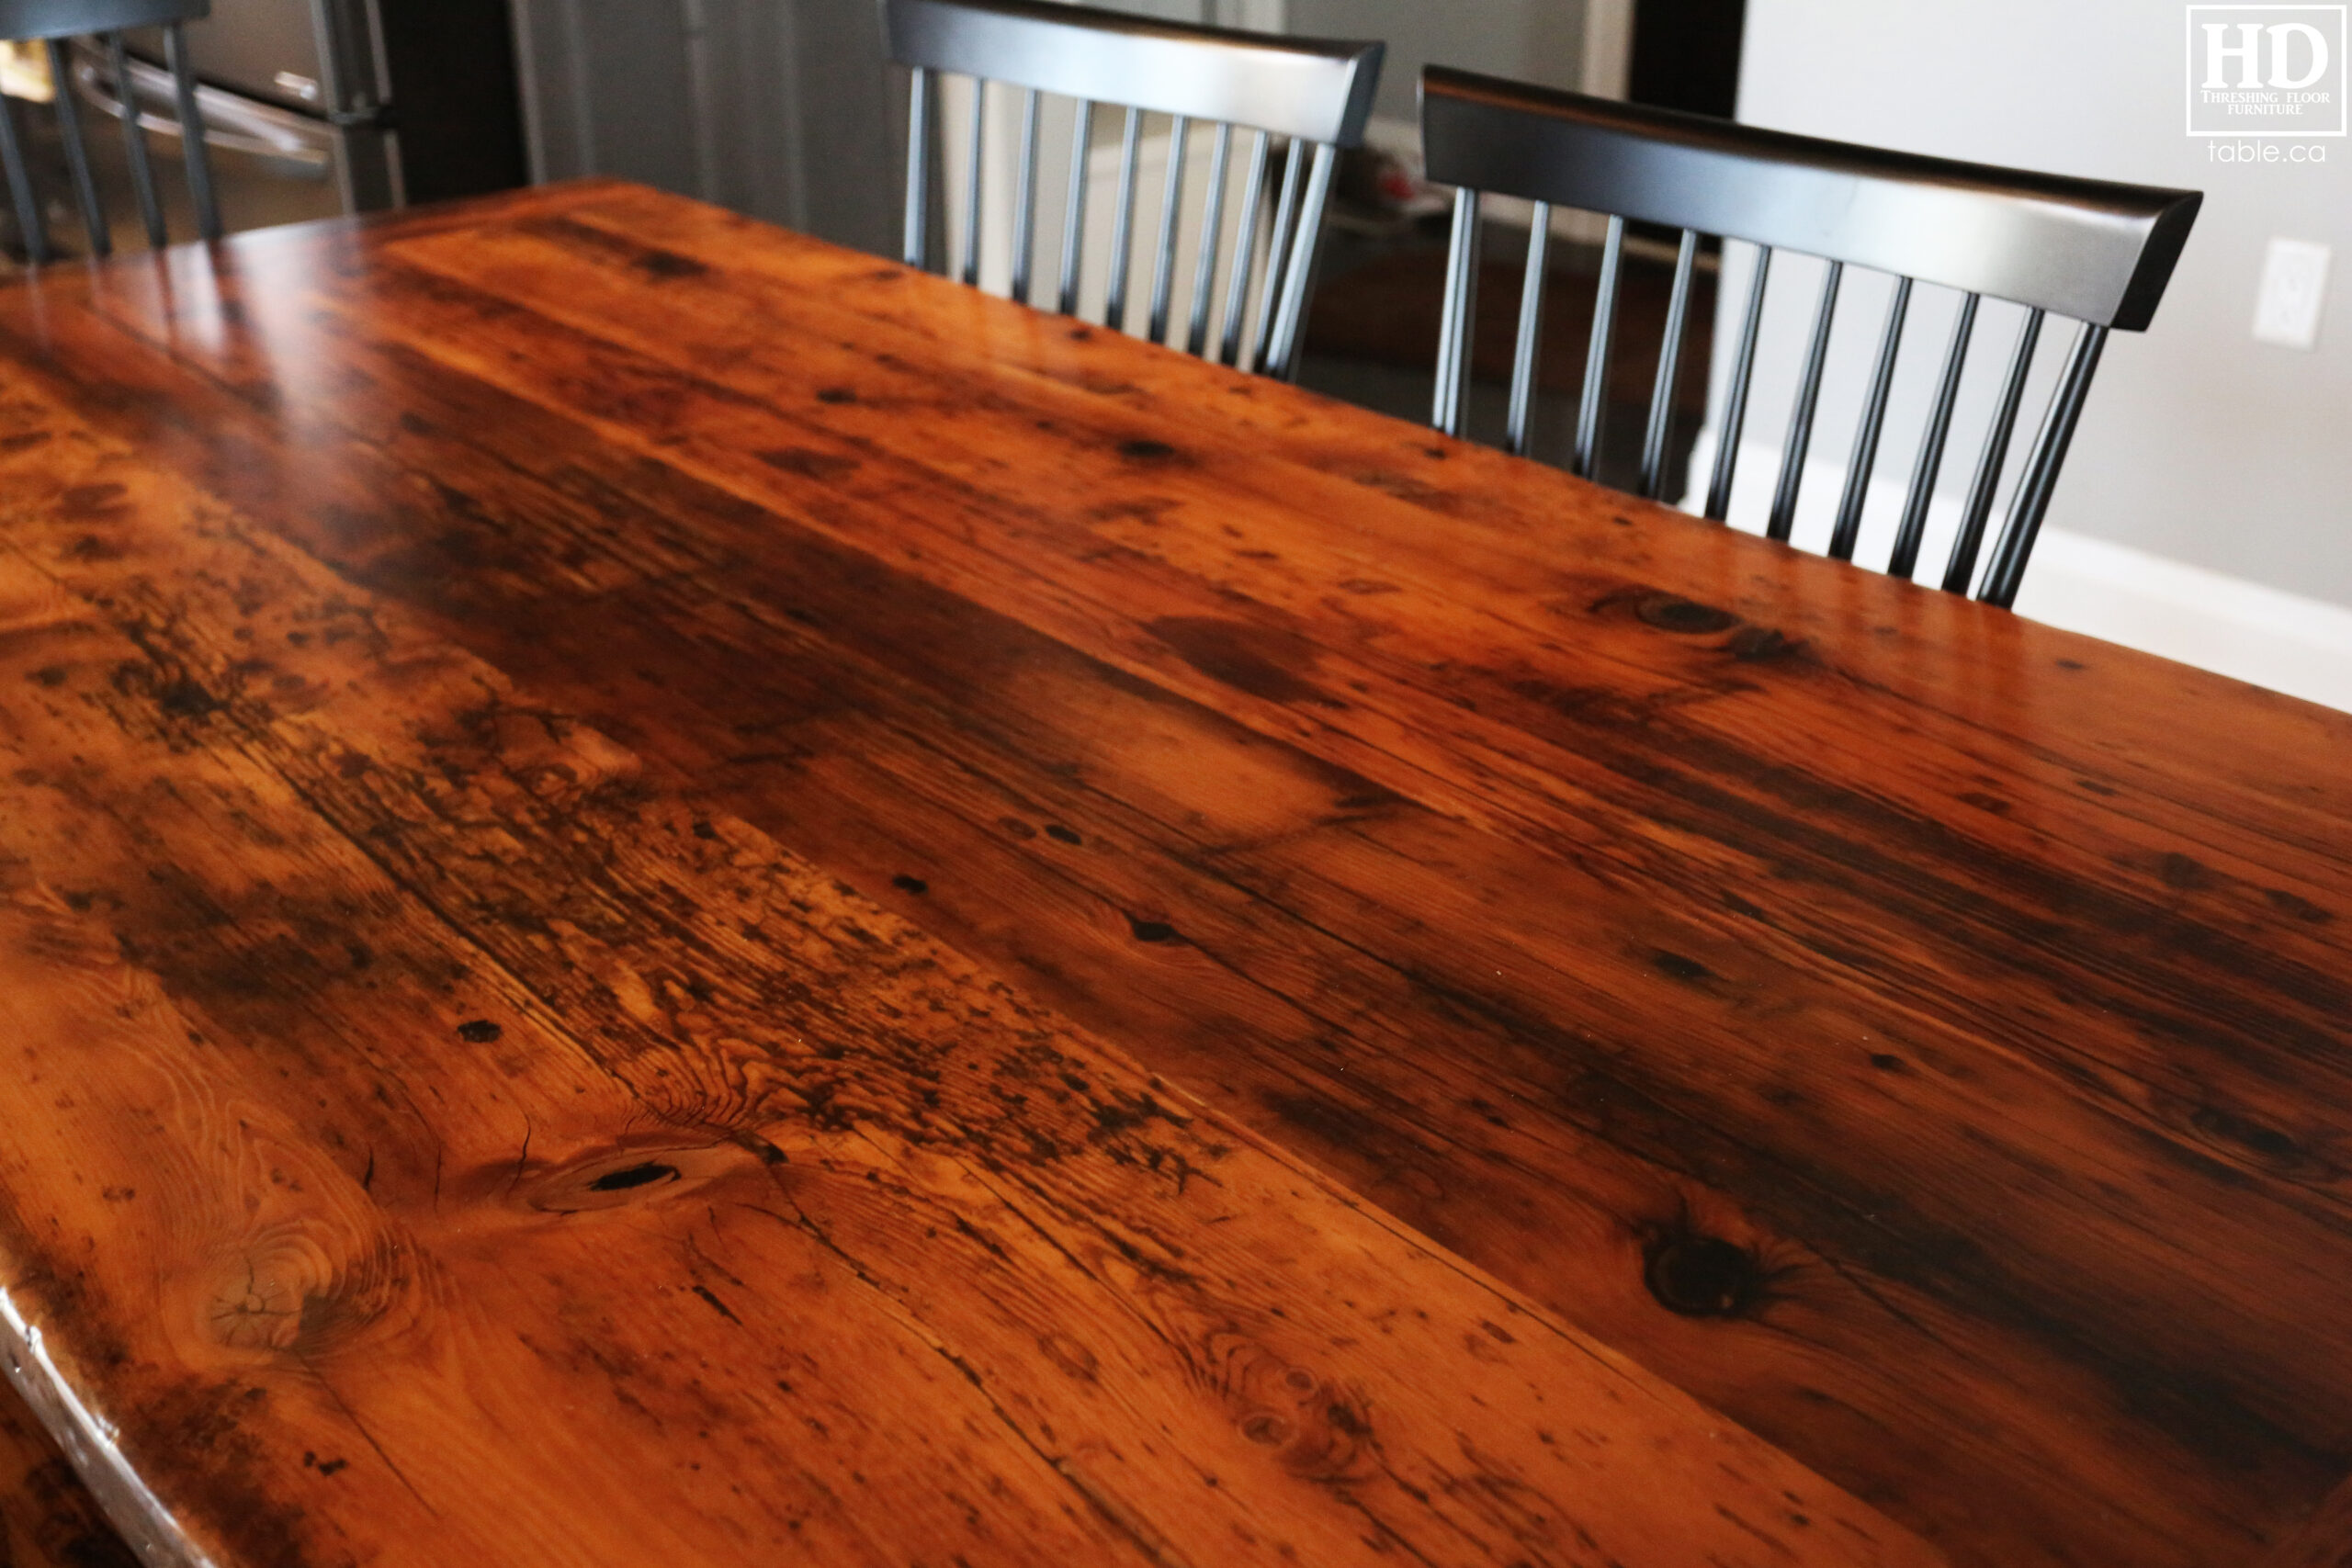 Details: 7' Reclaimed Wood Table we made for an Orono home - 42" wide - Trestle Base - Hemlock Threshing Floor Construction - Original edges & distressing maintained - Premium epoxy + satin polyurethane finish - 7' Reclaimed Wood Trestle Bench - [4] Shaker Chairs / Wormy Maple / Solid black / Polyurethane clearcoat finish / www.table.ca